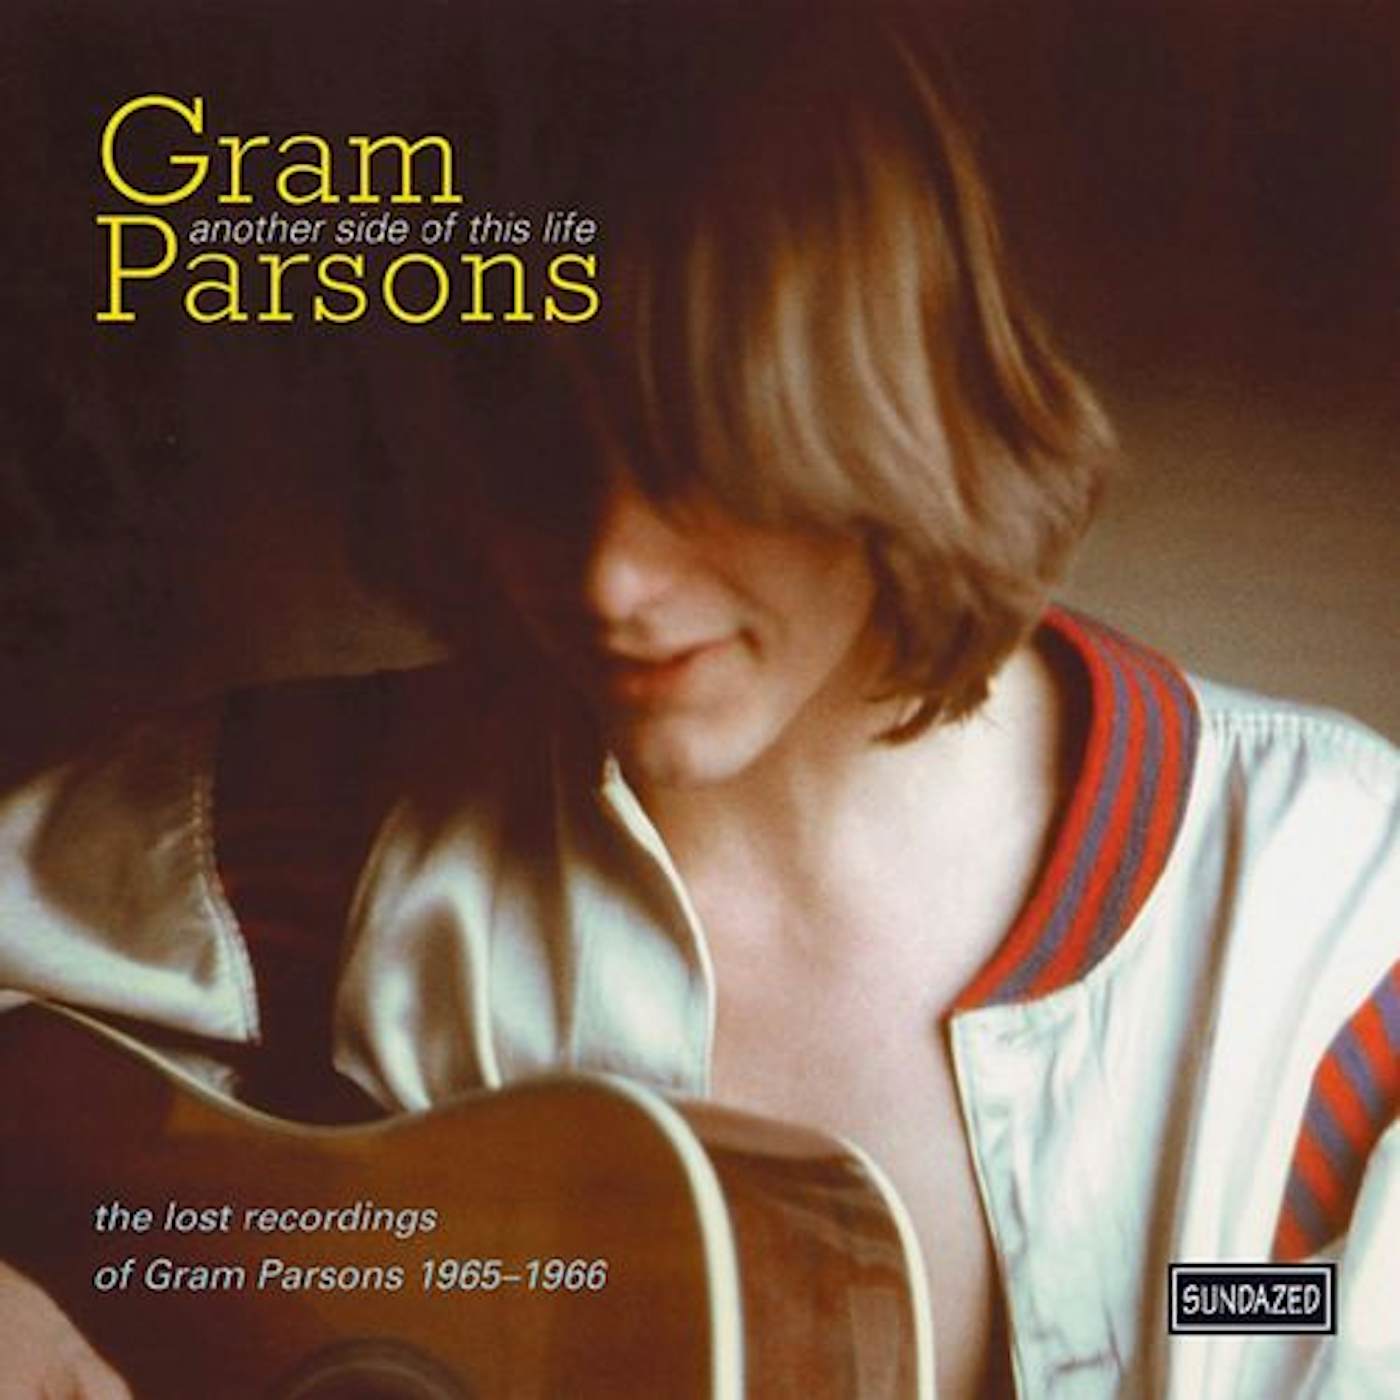 Gram Parsons Another Side of This Life Vinyl Record